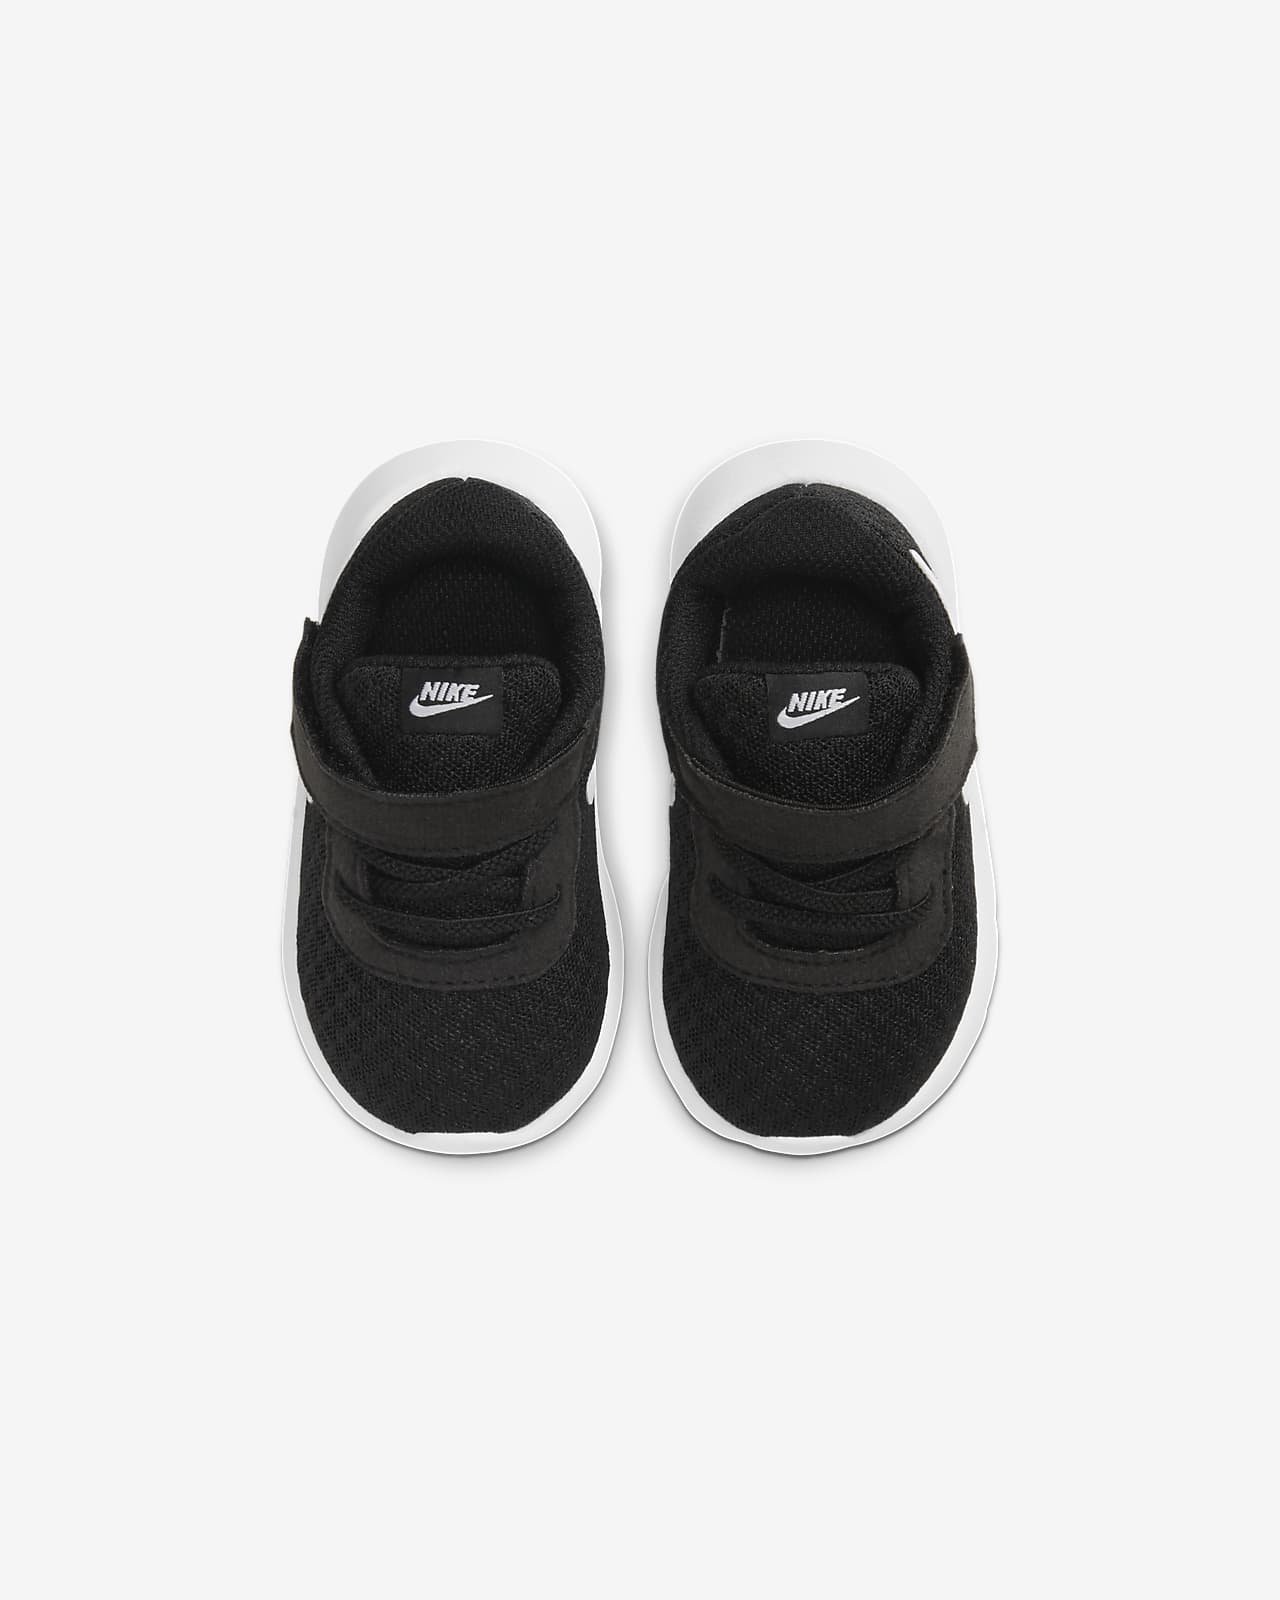 black nikes for toddlers